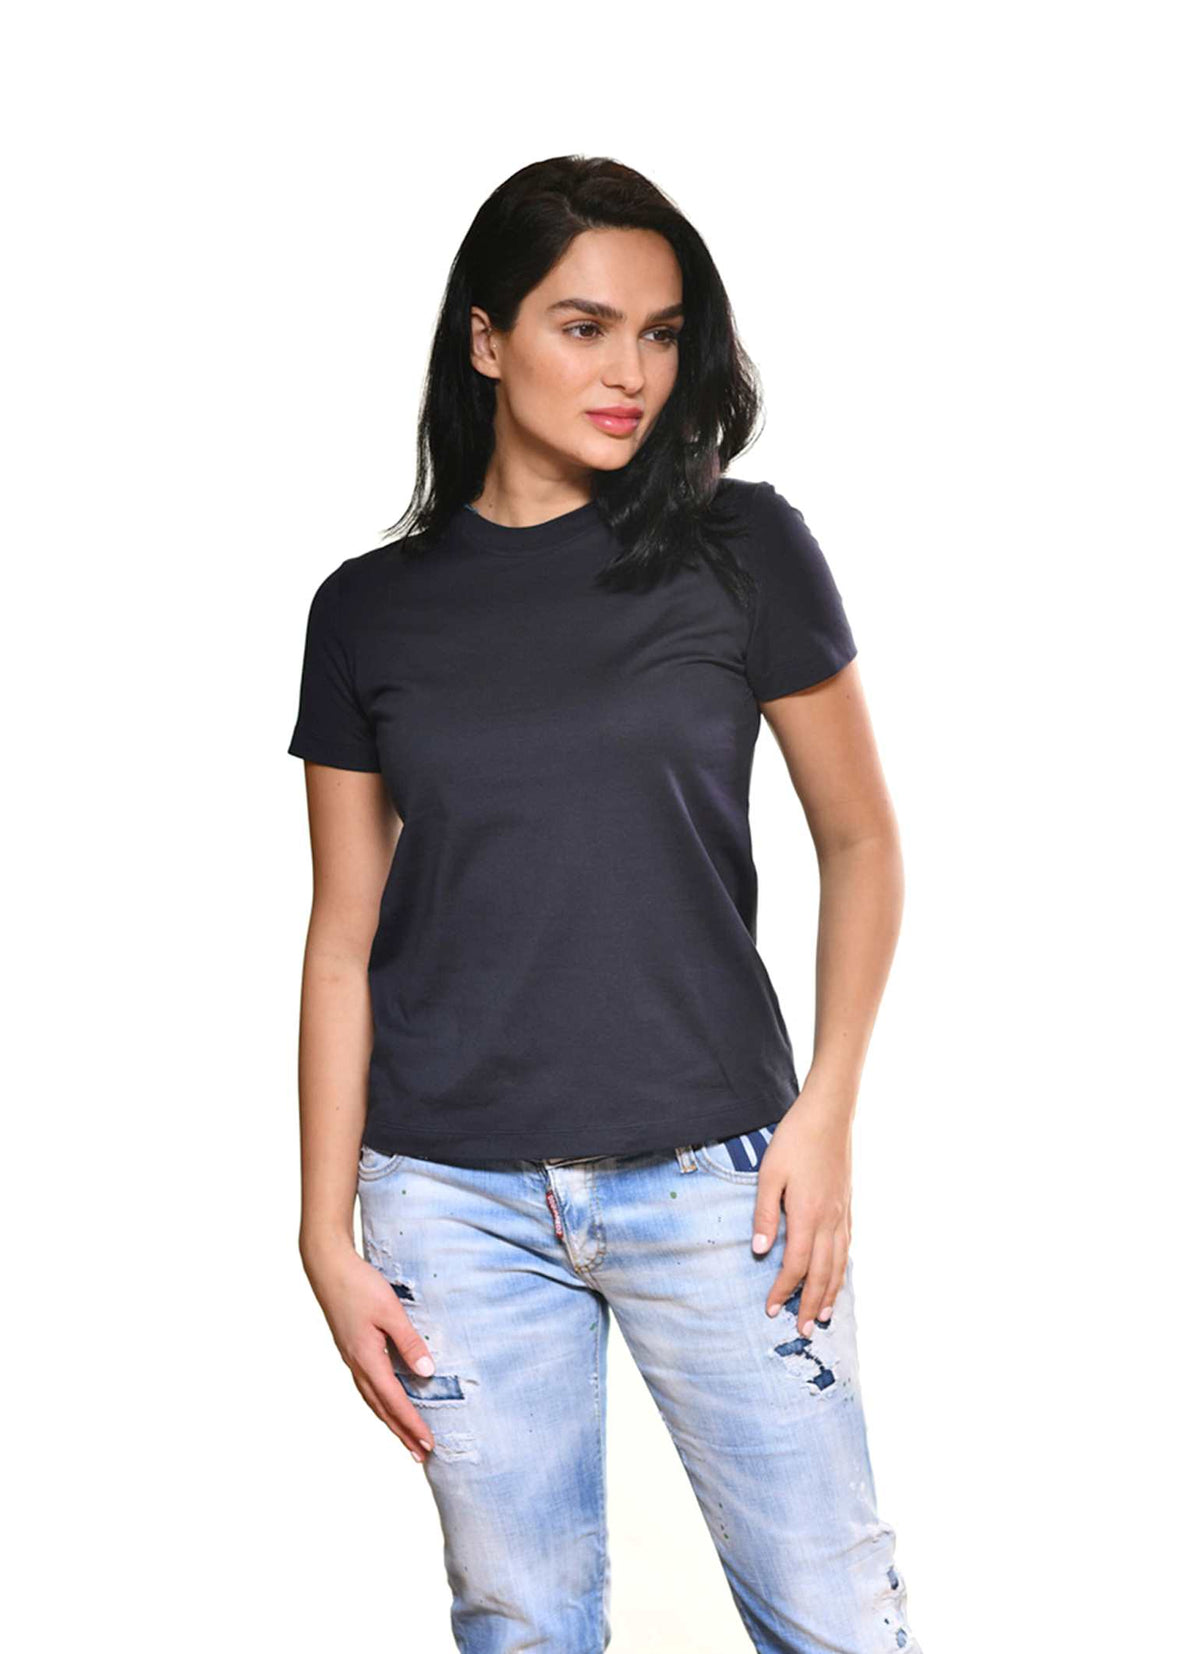 Carmen Sol short sleeve tee shirts for women in color mid night blue